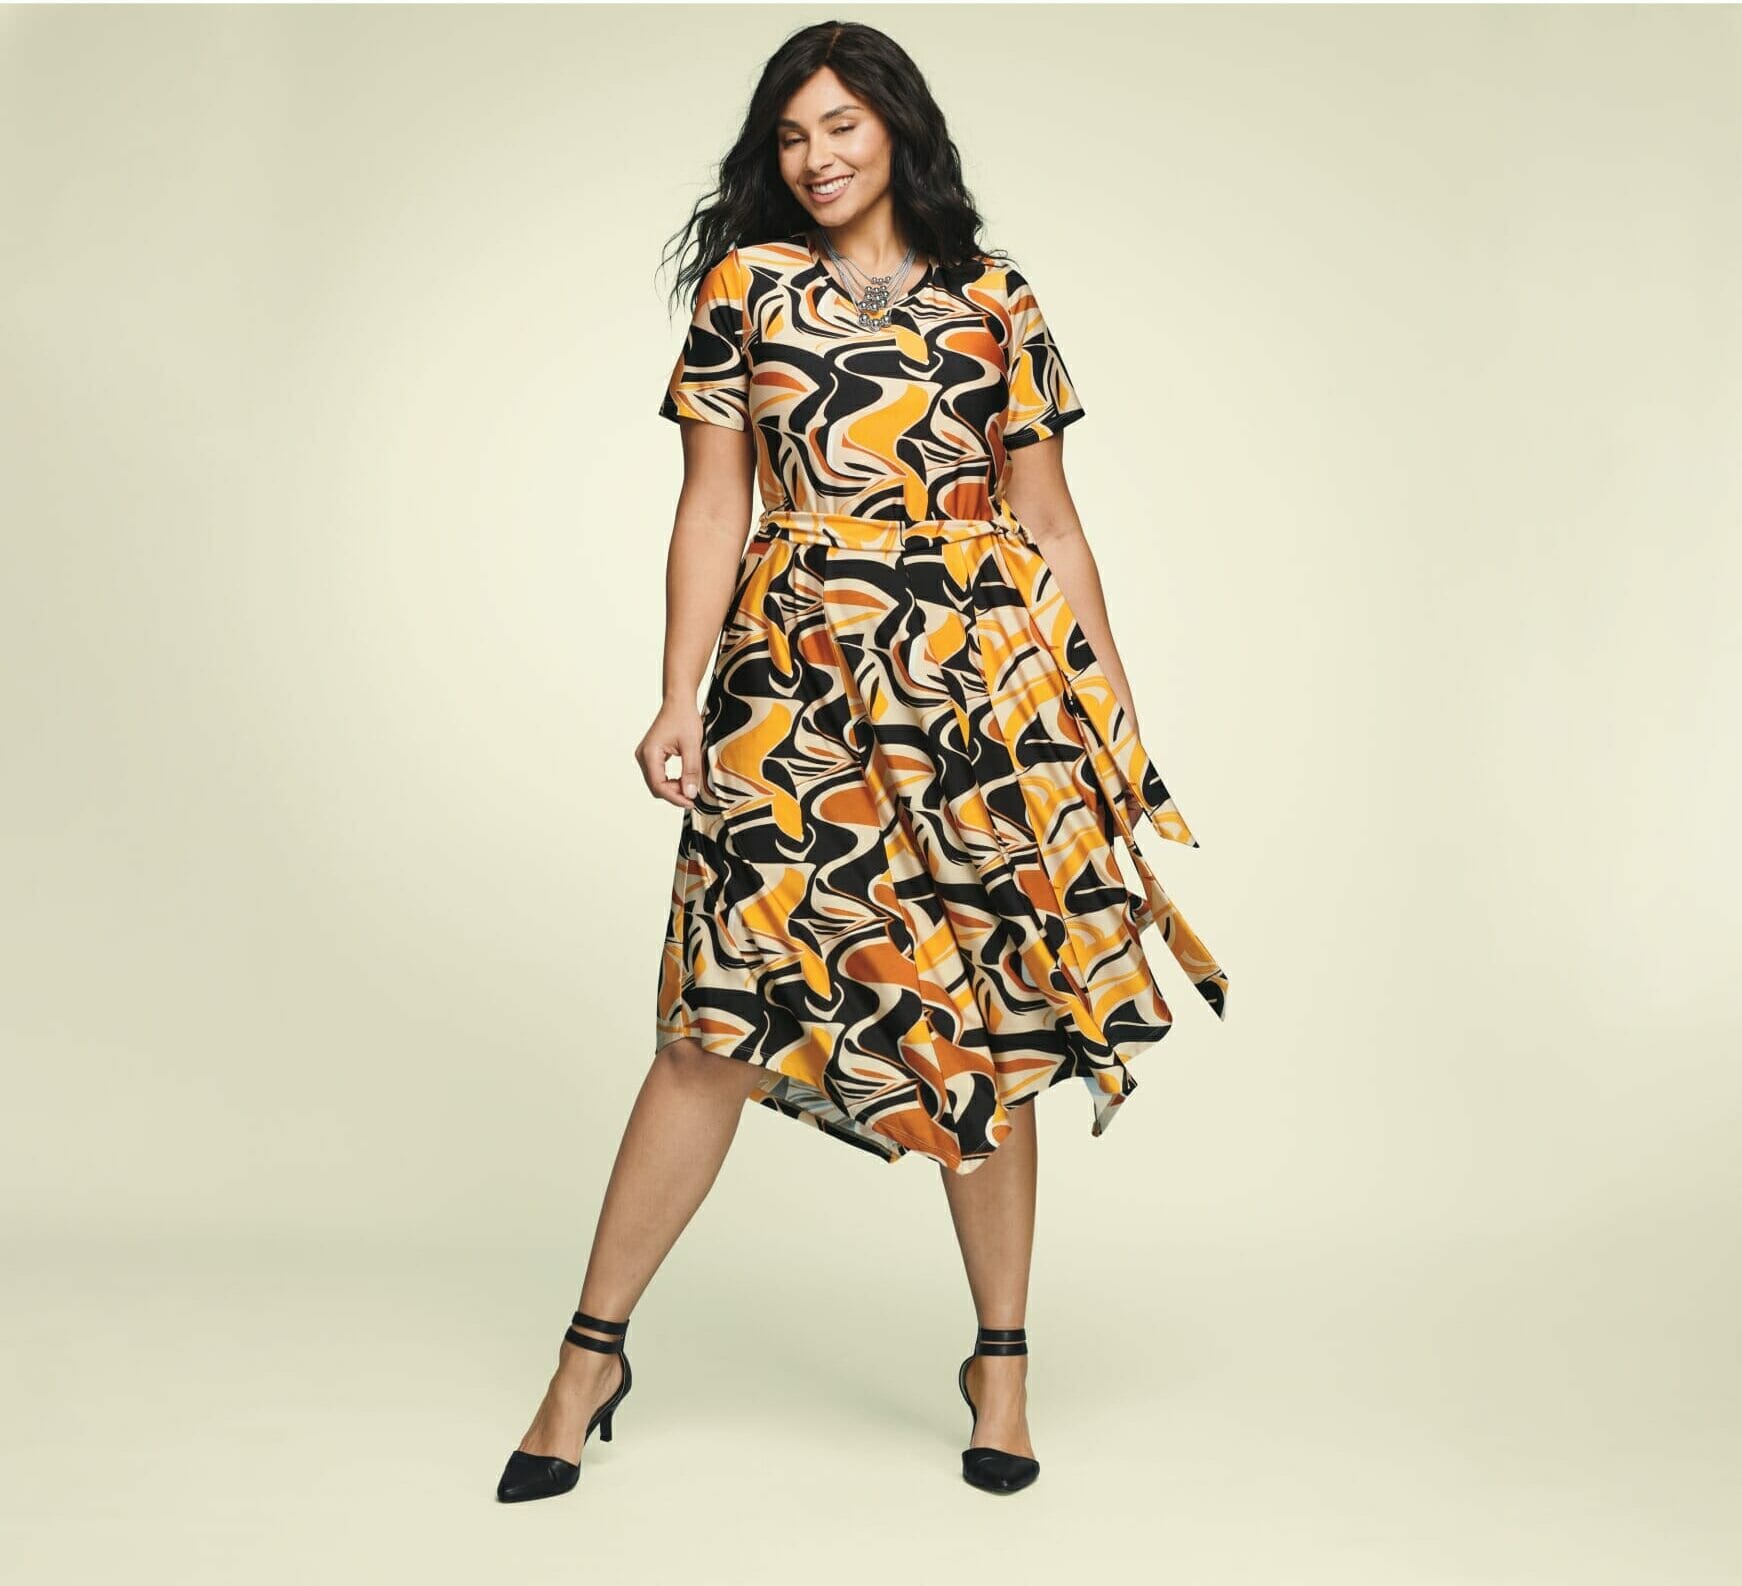 plus size model wearing a printed orange and yellow dress with black pumps.